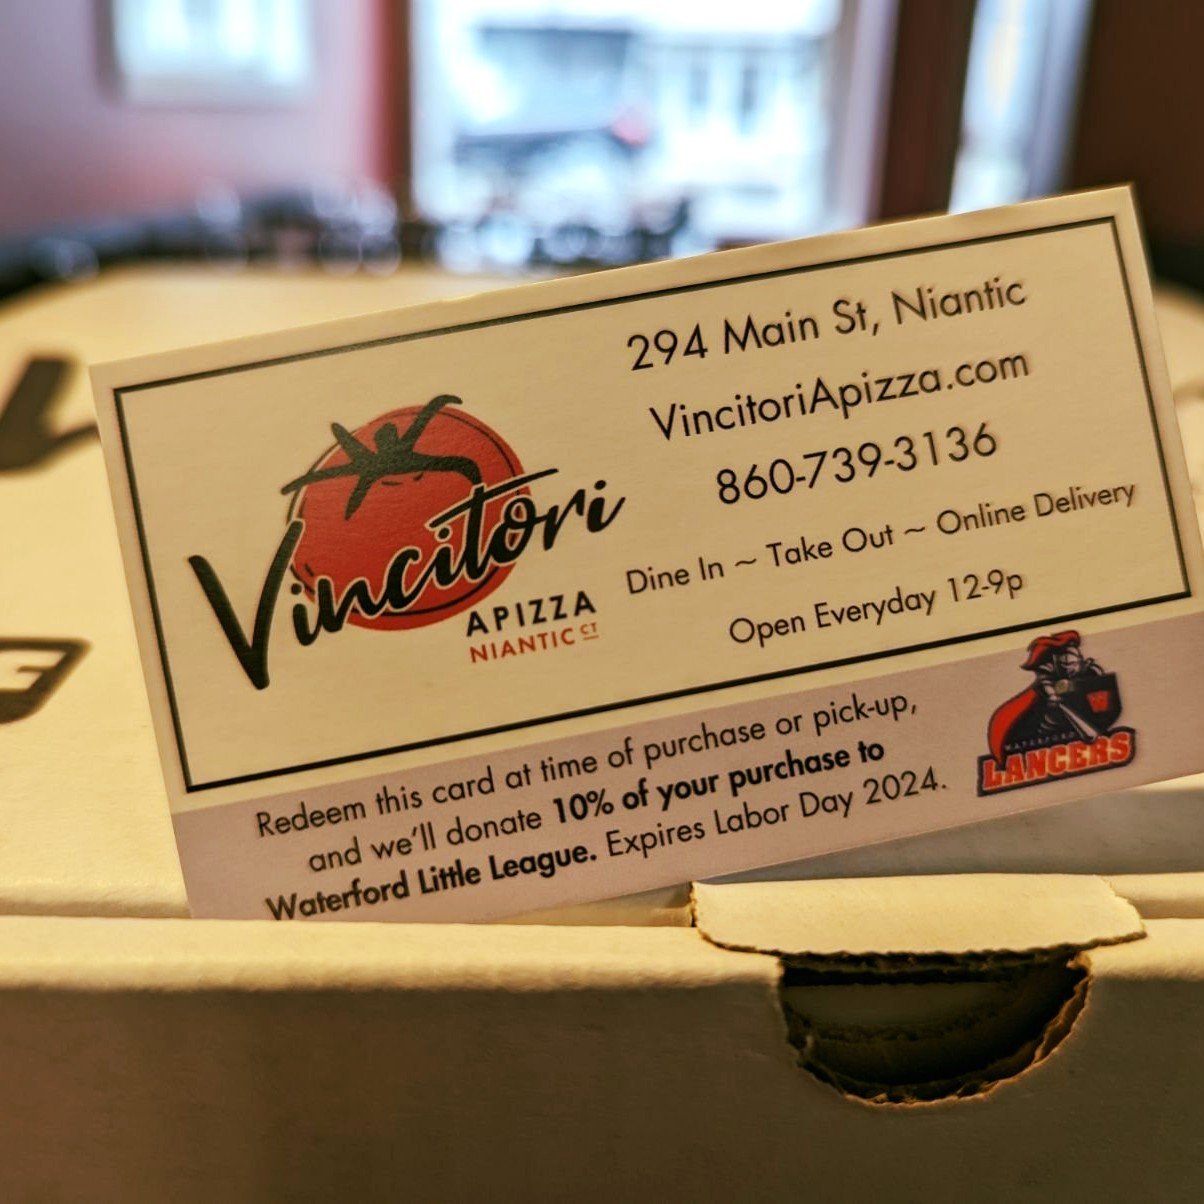 Stop by our tent for pizza at @waterfordlittleleague, Tuesdays during the season. 

💥 On Tuesday, April 23, we'll be giving out these donation cards. 

#supportlocal #supportyourcommunity #giveback #waterfordct #ctshoreline #kidsarethefuture